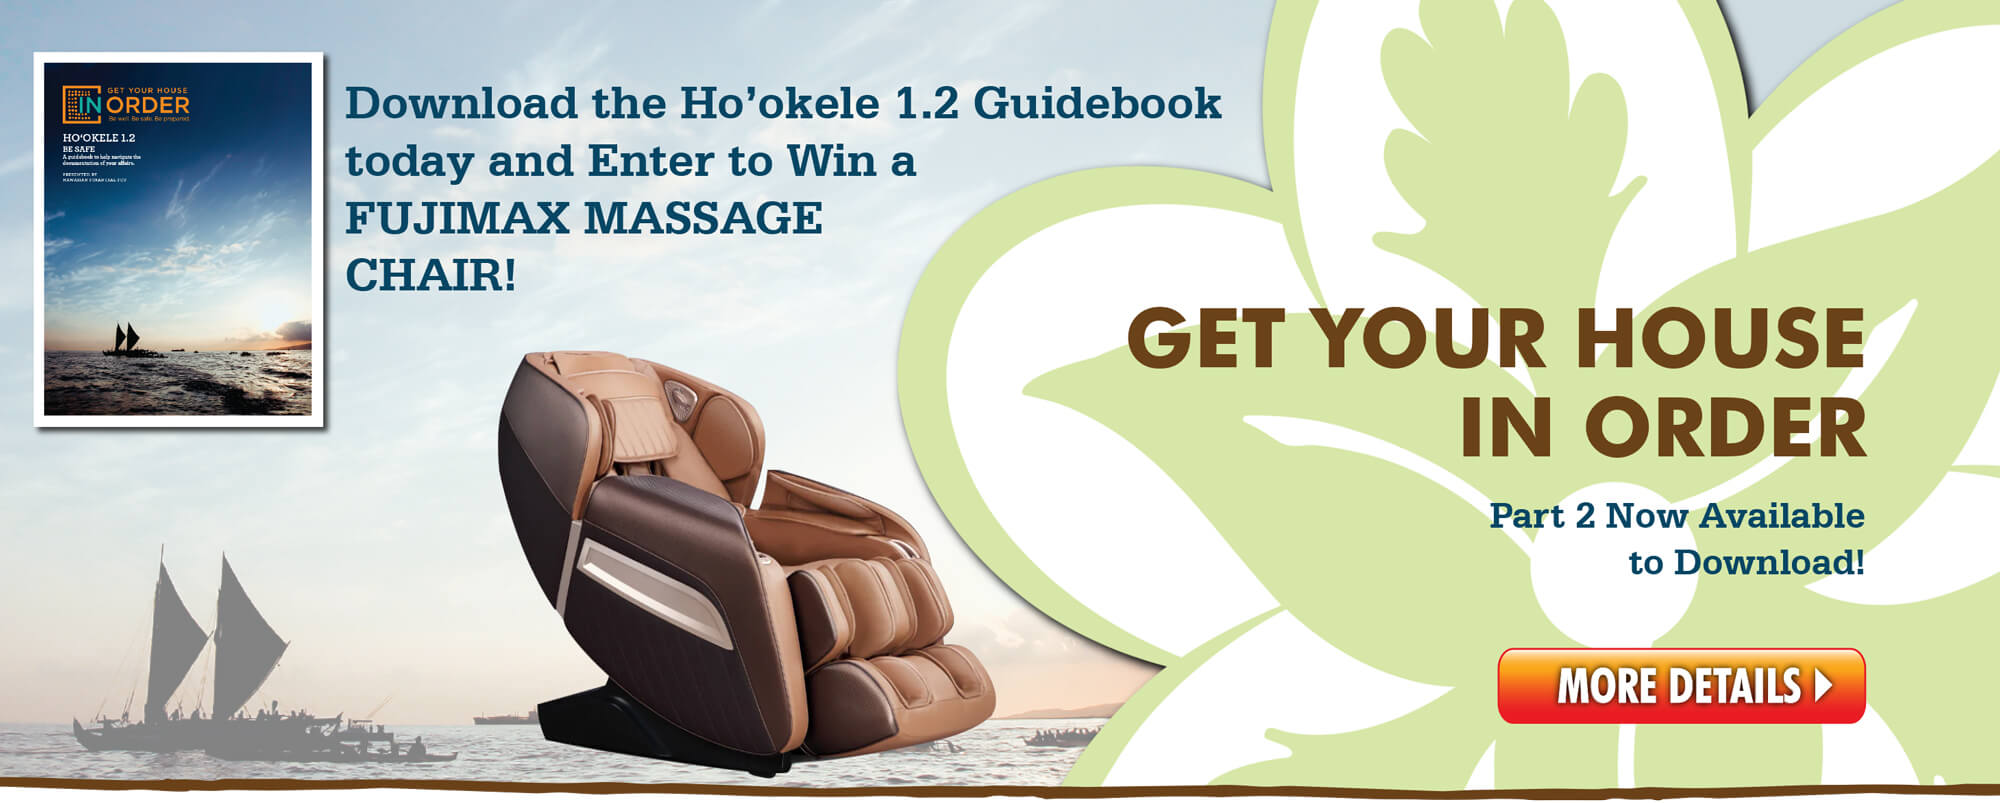 Download the Ho'okele Guidebook today to 